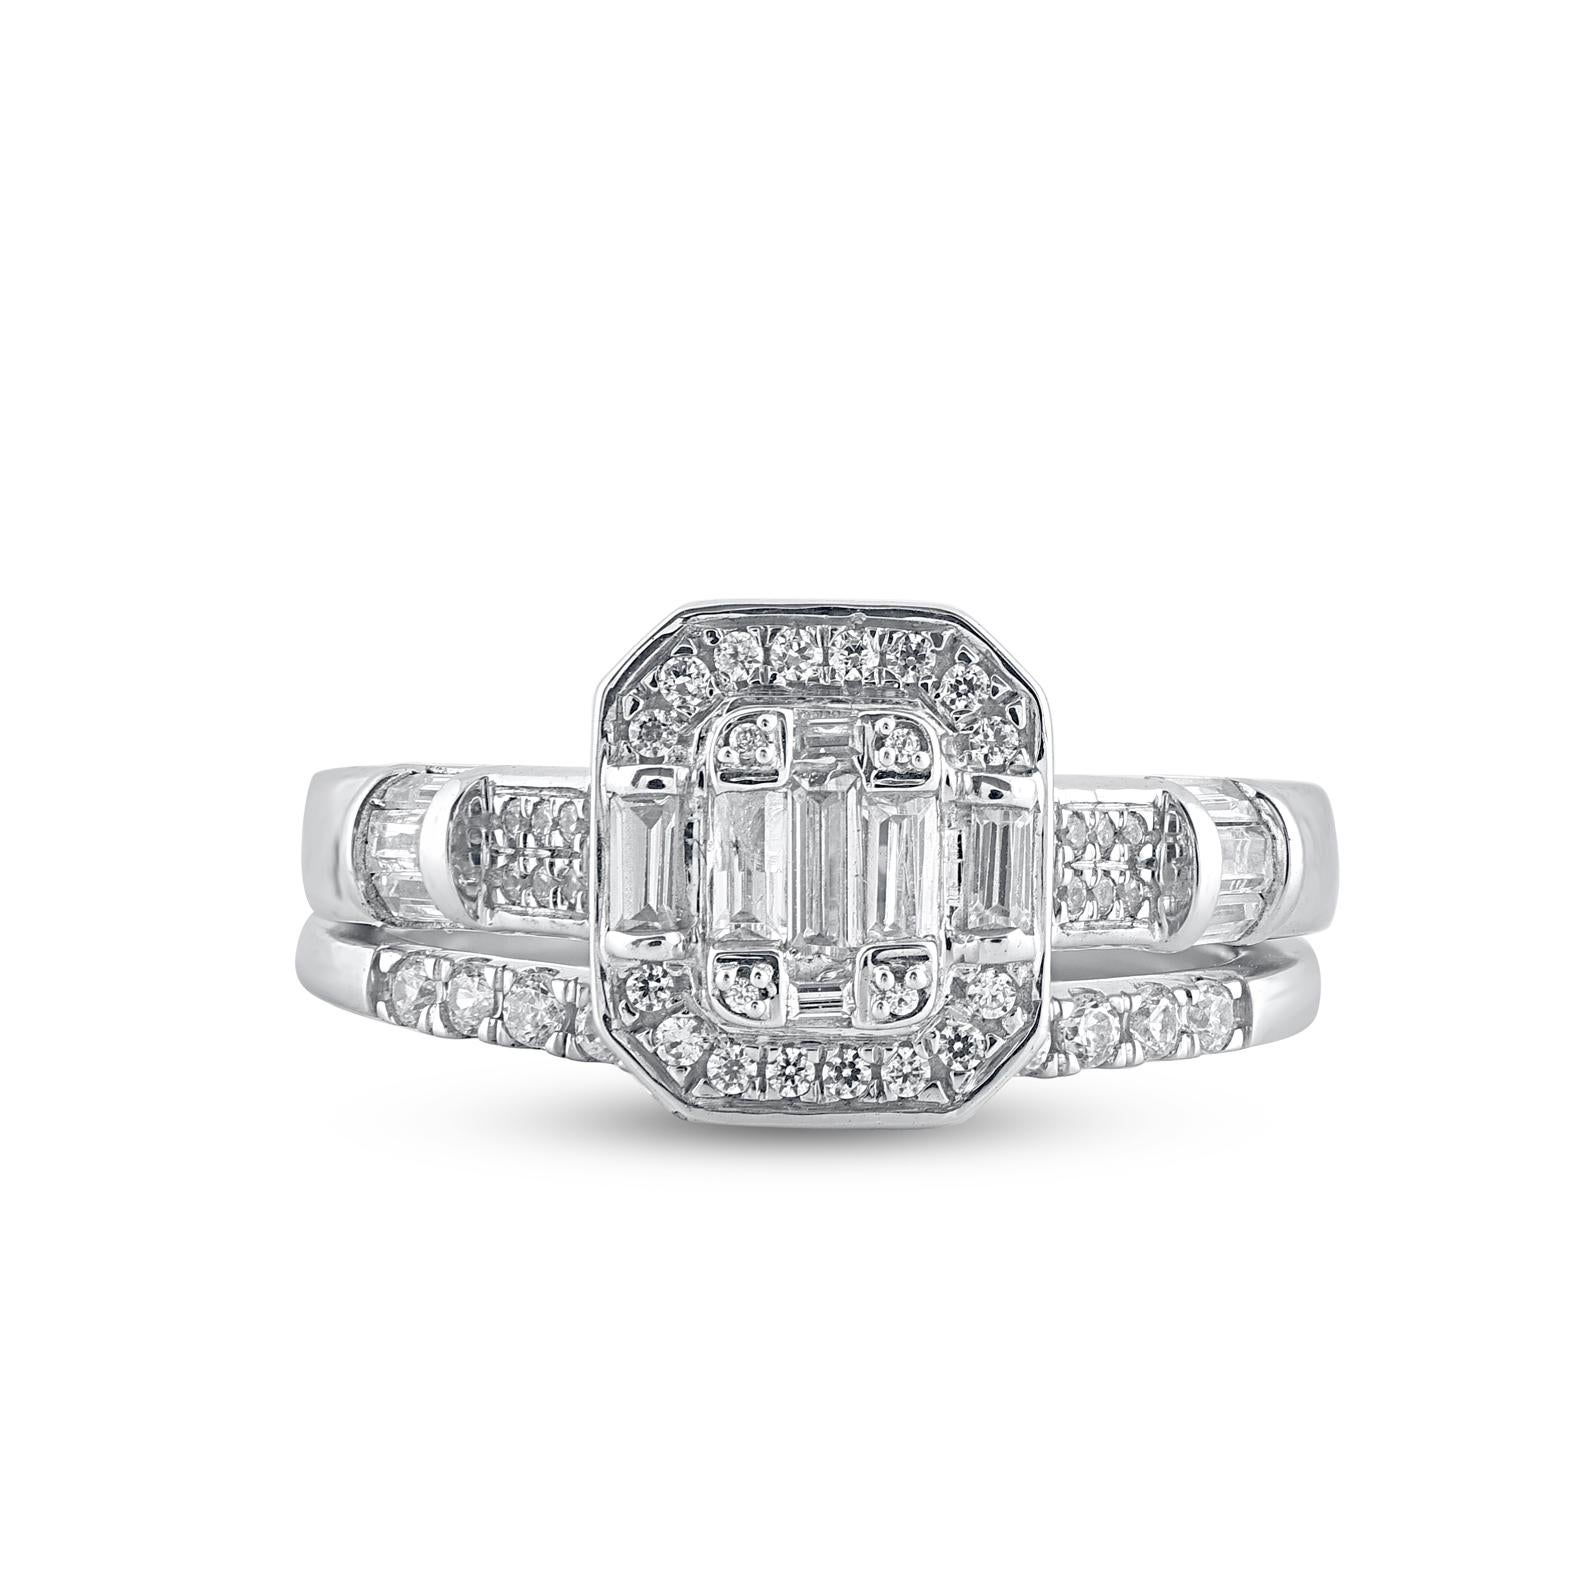 Give her a sophisticated reminder of your love with this diamond ring set. Crafted in 14 Karat white gold. This wedding ring features a sparkling 57 brilliant cut, single cut round diamonds and baguette cut diamonds beautifully set in prong, pave,